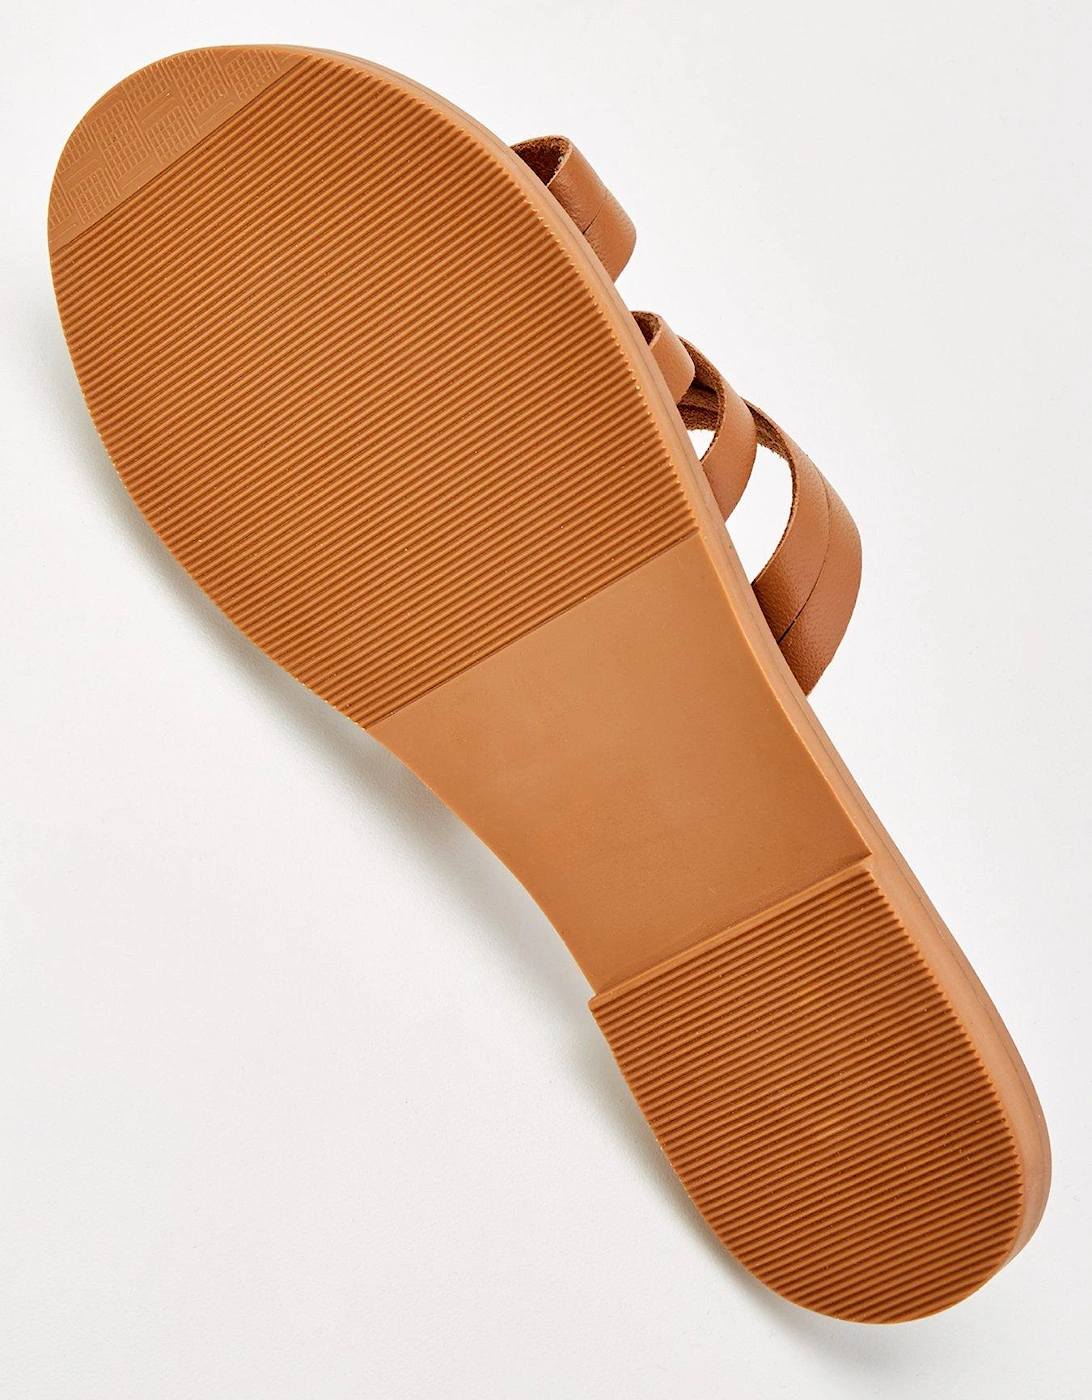 Extra Wide Fit Strappy Leather Slider - Brown